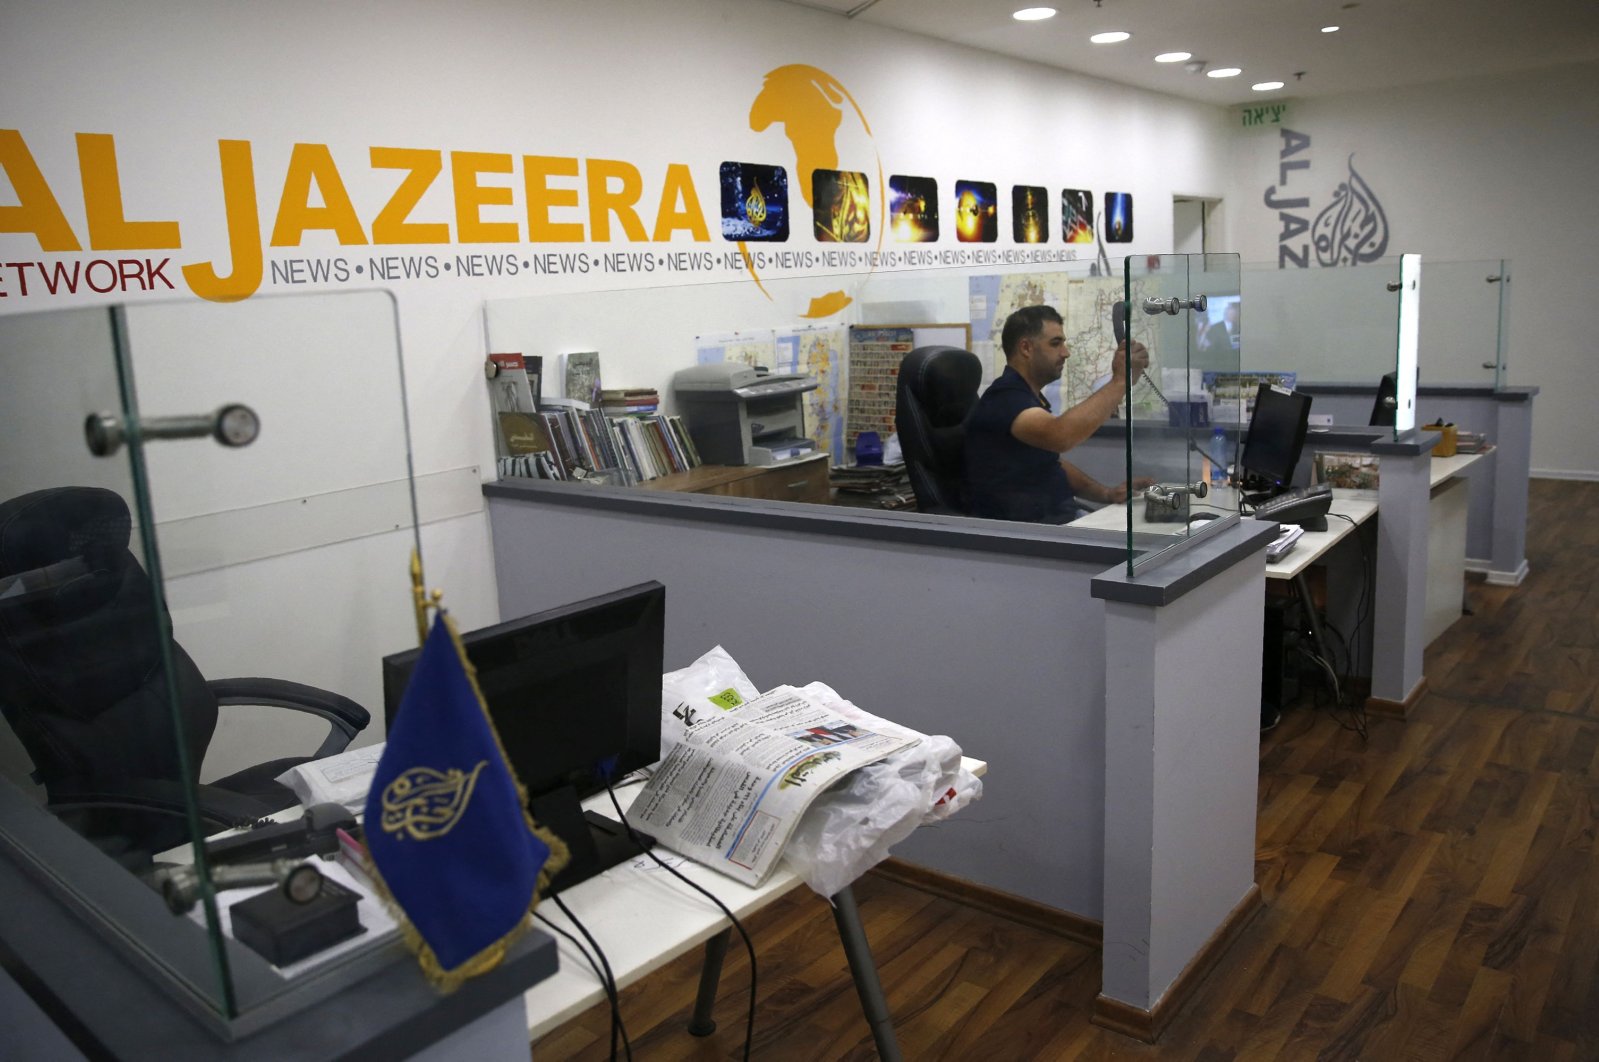  An employee of the Qatar-based news network and TV channel Al-Jazeera is seen at the channel&#039;s Jerusalem office, July 31, 2017. (AFP File Photo)